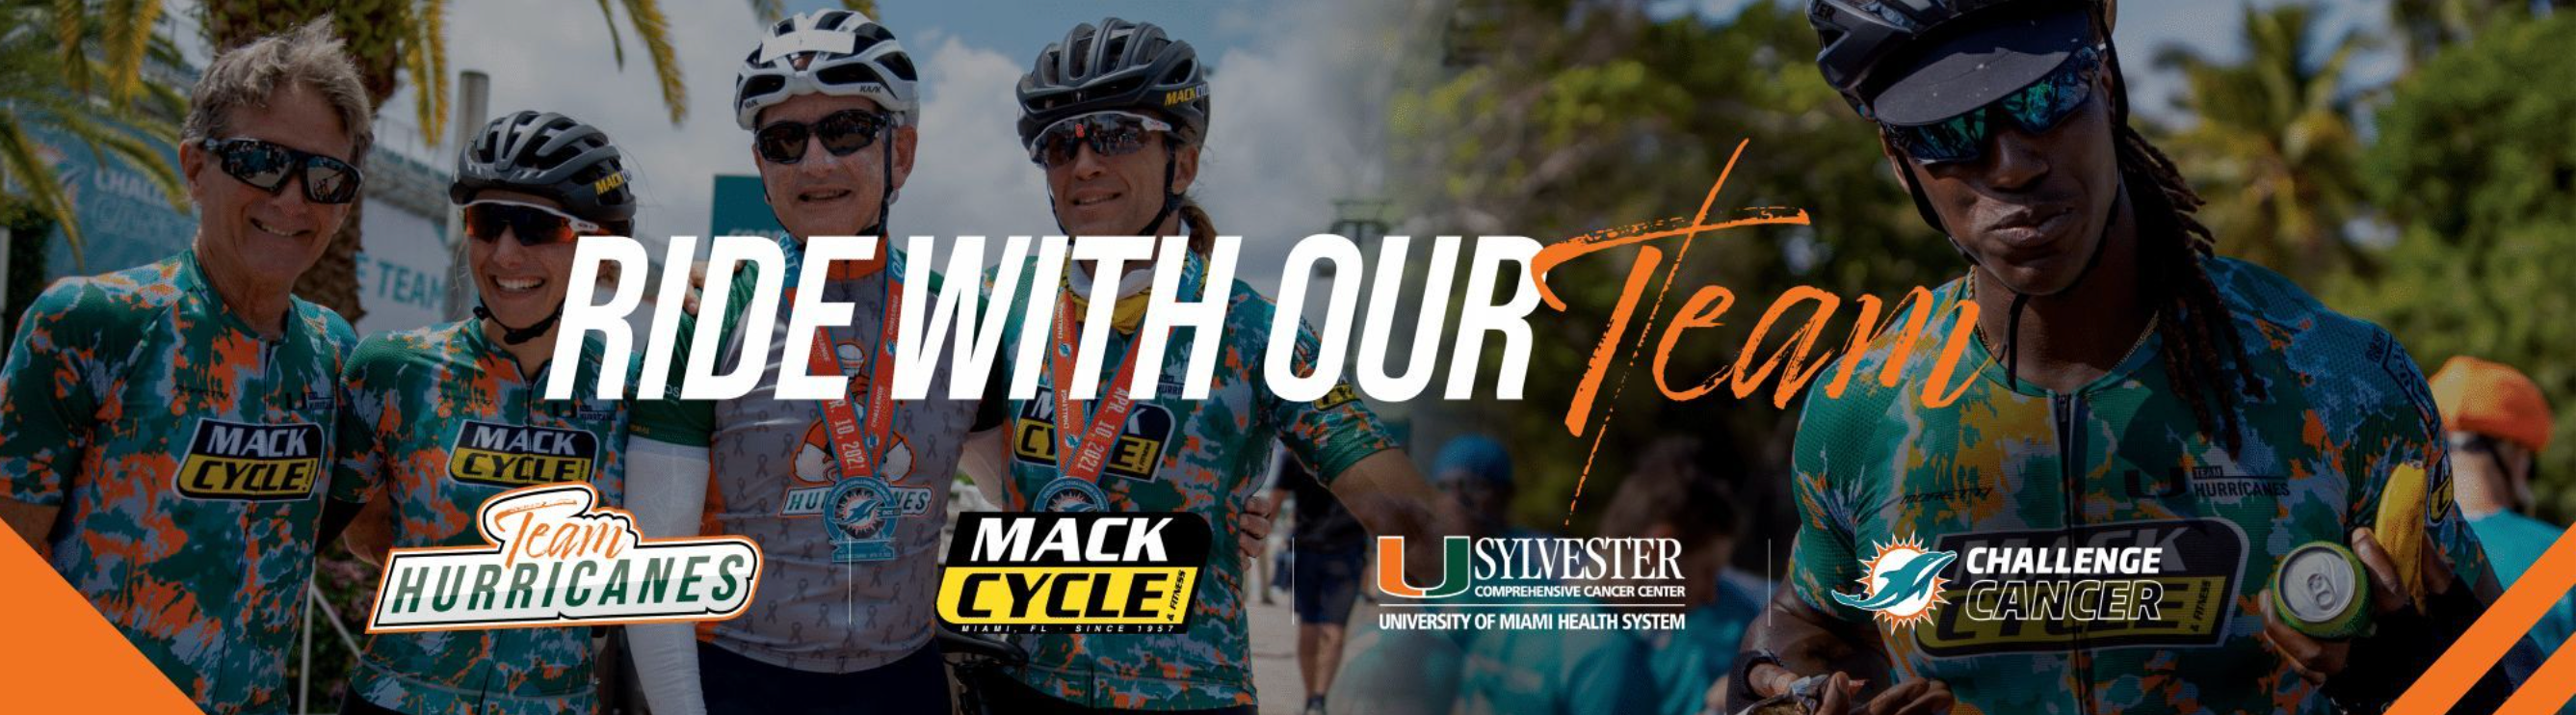 free registration to ride with team hurricanes mack cycle for the dolphins challenge cancer